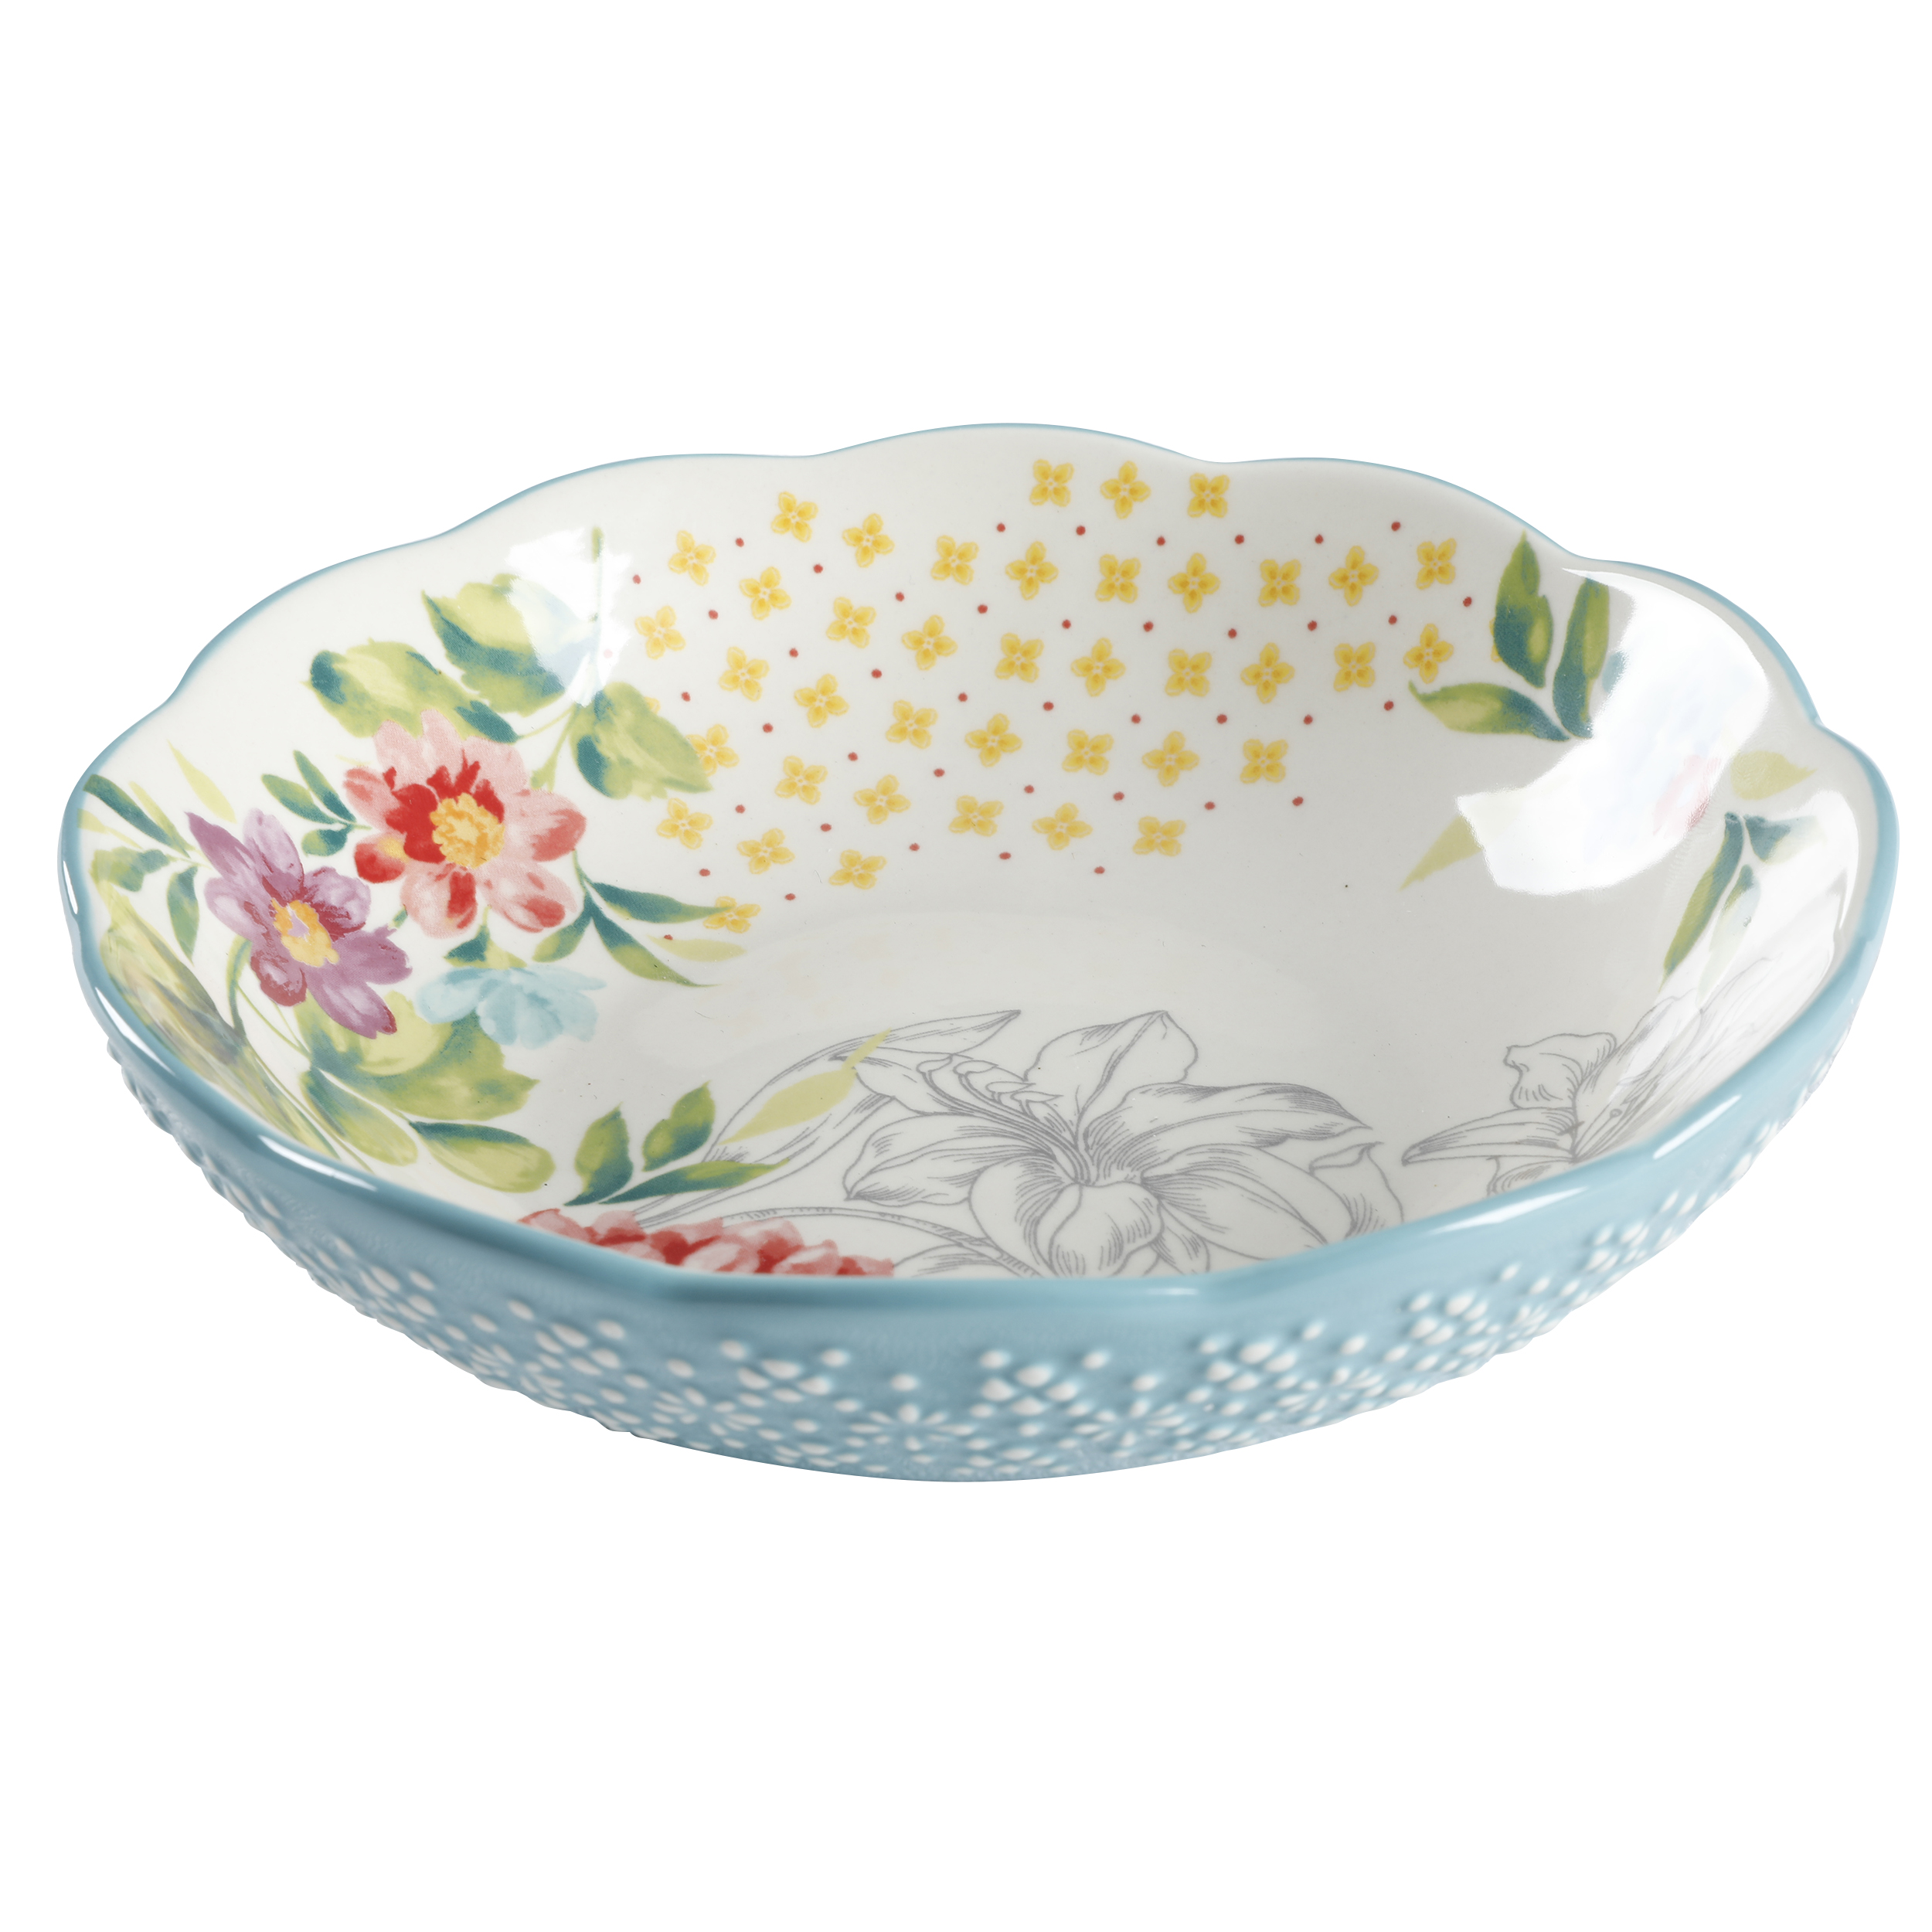 The Pioneer Woman Floral Medley Assorted Ceramic 7.5-inch Pasta Bowls, 3-Pack - image 4 of 9